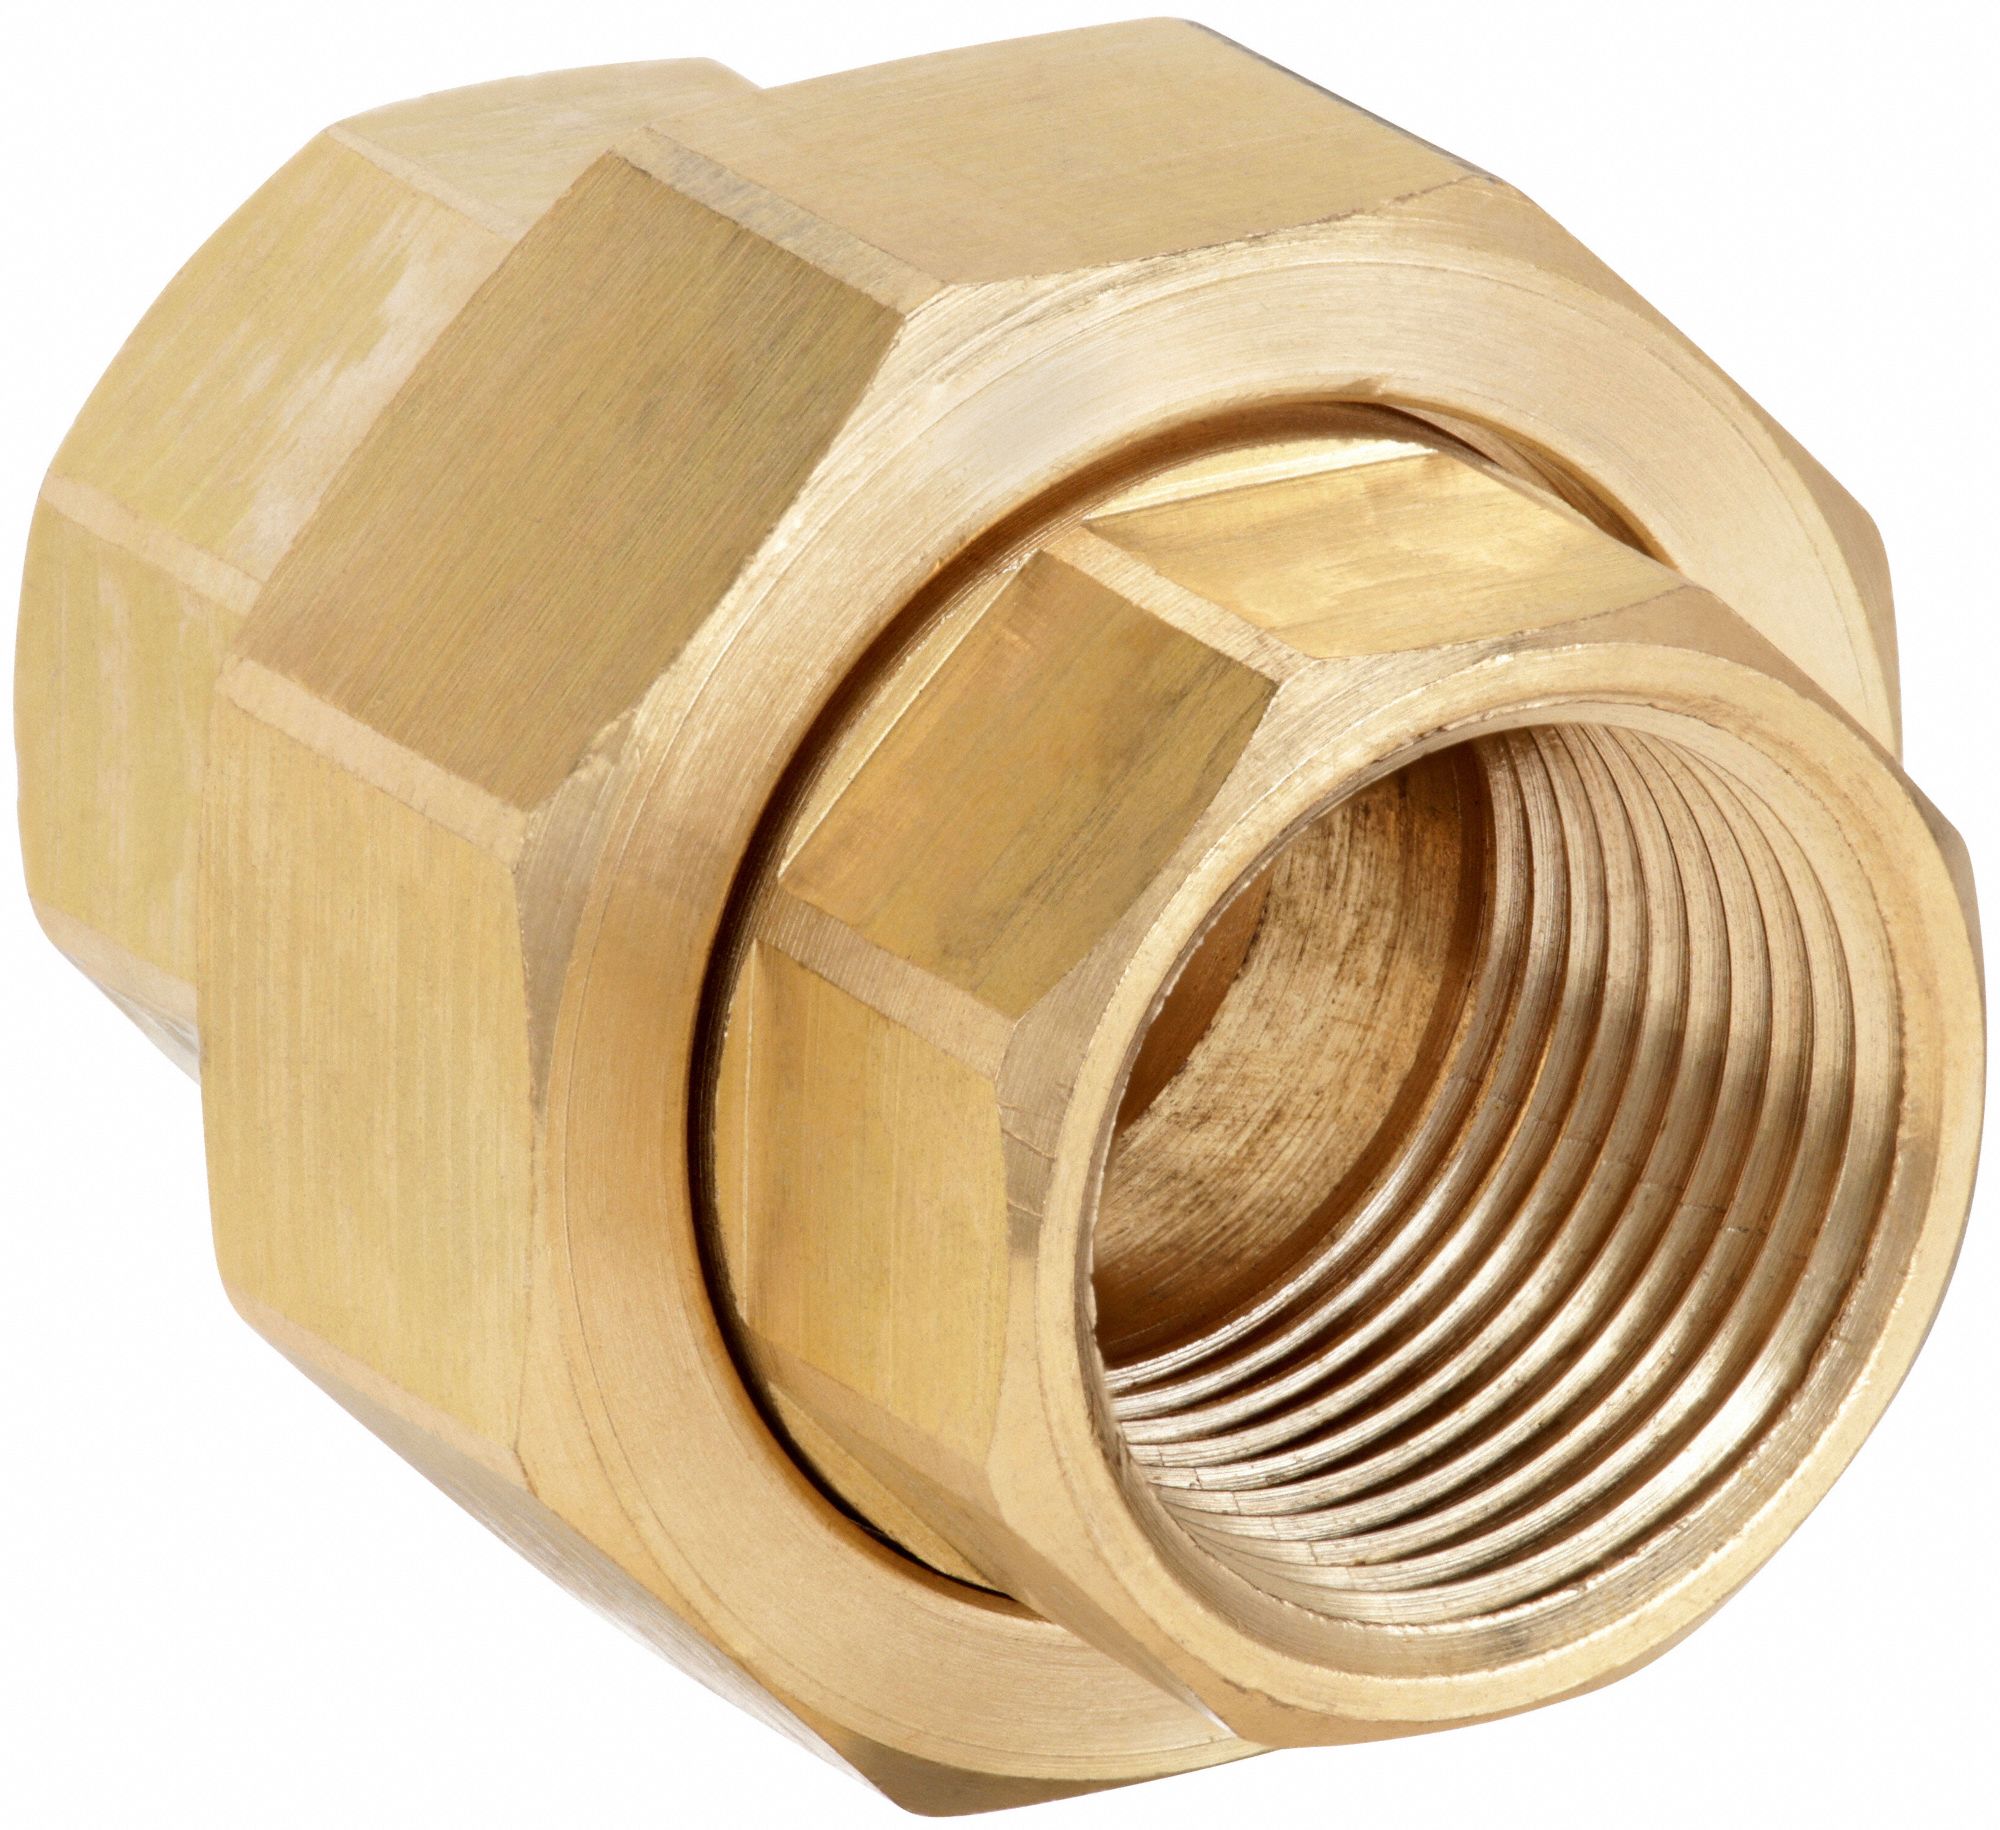 APPROVED VENDOR BRASS UNION,3/4 IN,FNPT - Metal Pipe Fittings - GGM6AYY6